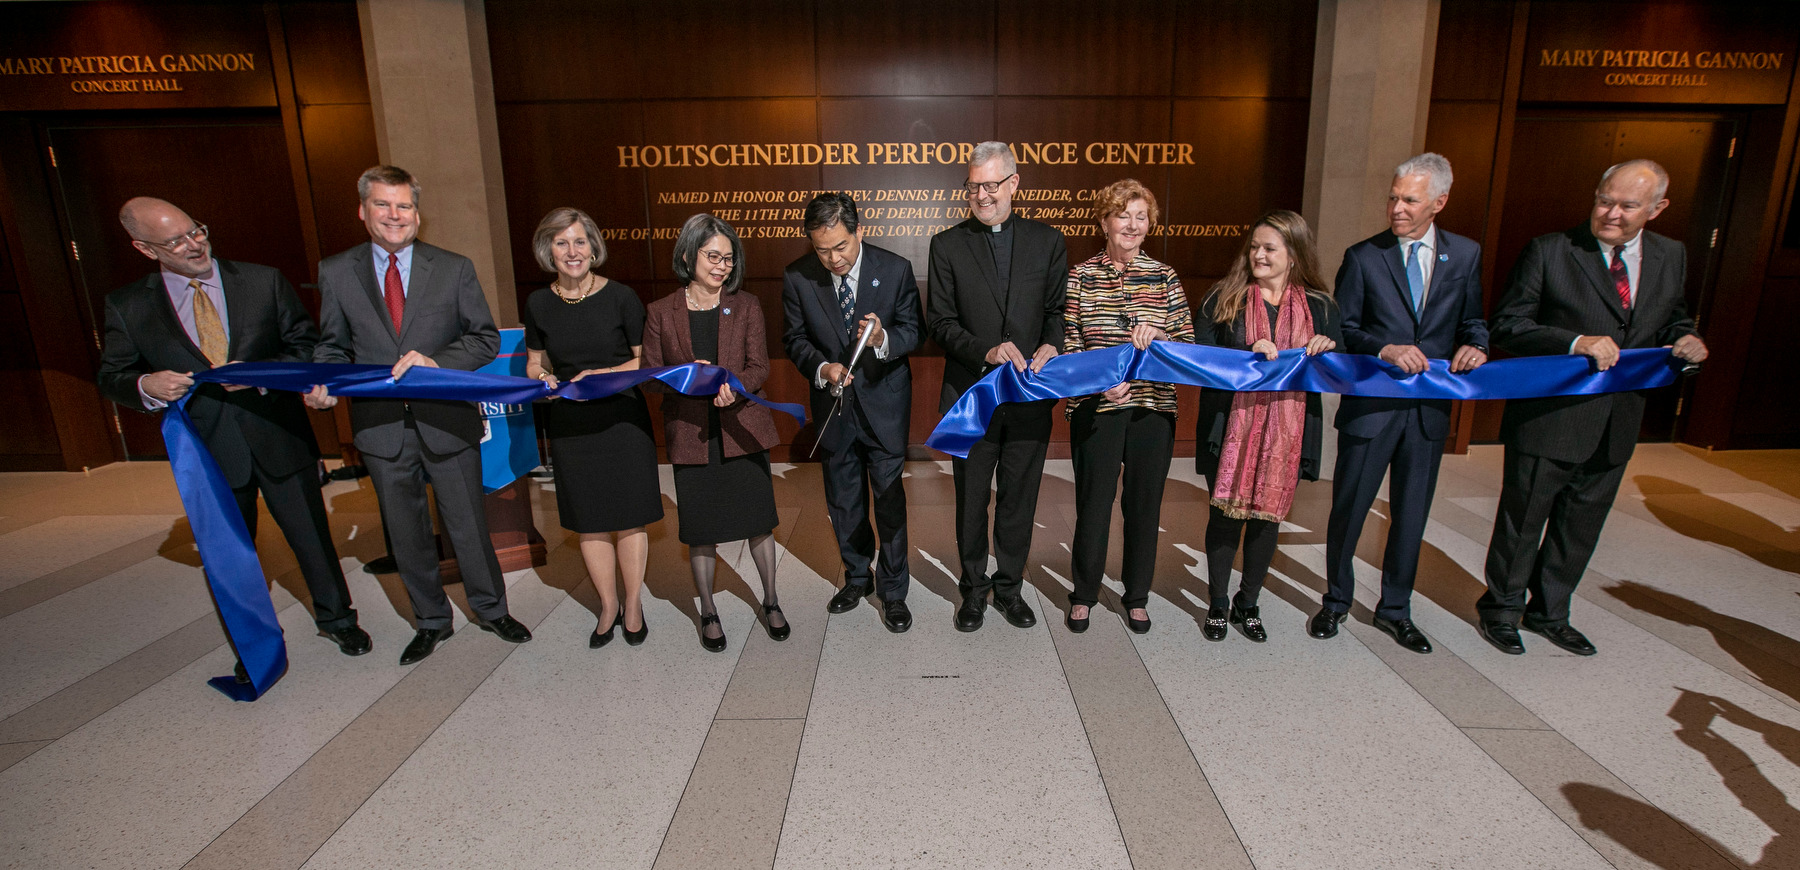 Blessing and reception of the new Holtschneider Performance Center